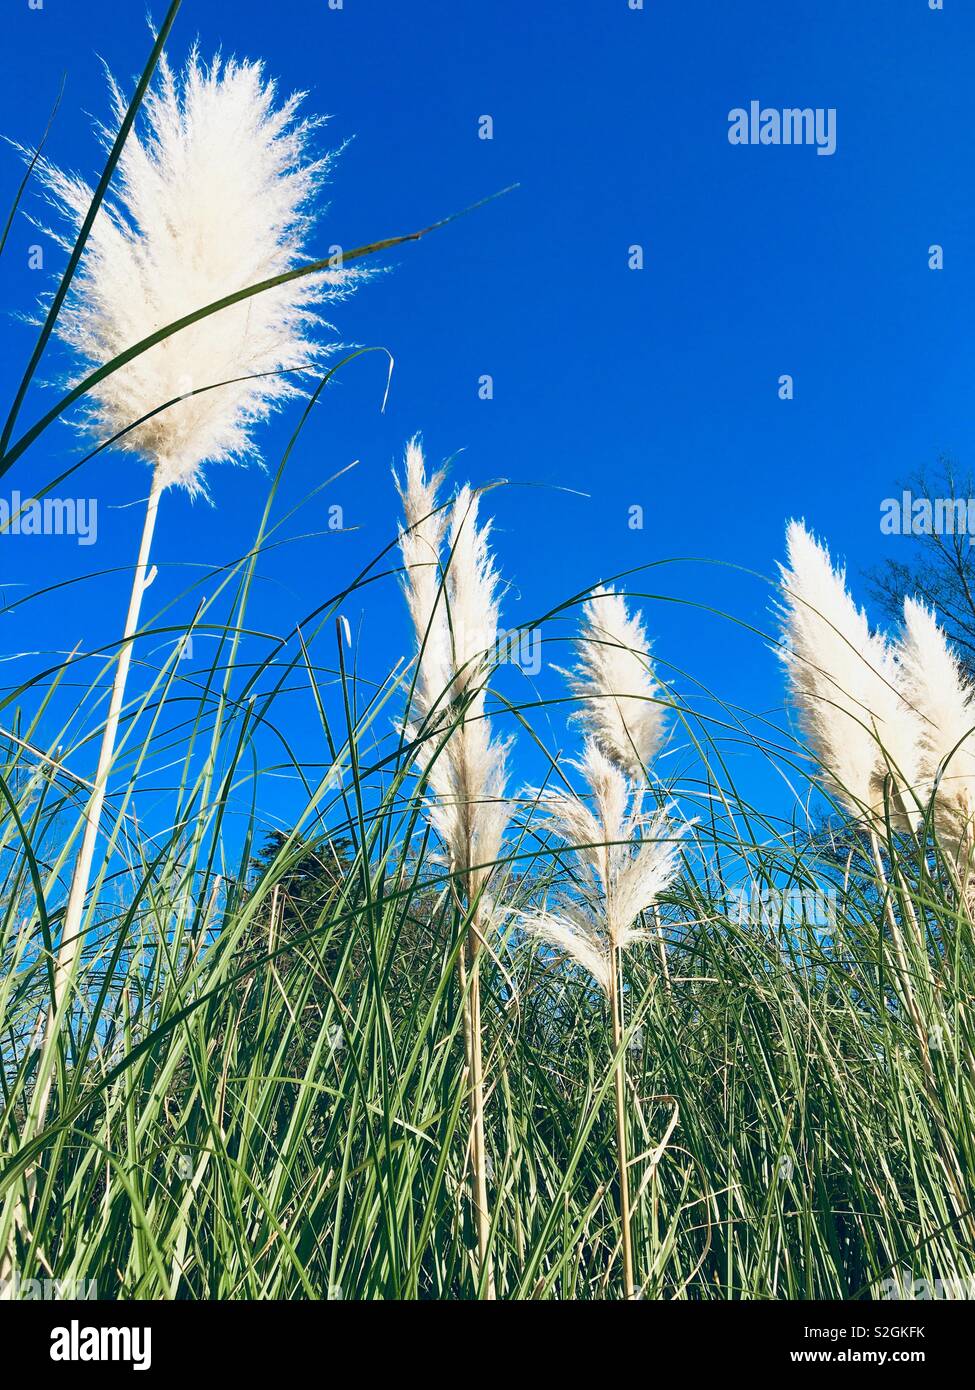 Pampas grass standing tall on a sunny day with clear blue sky. Stock Photo